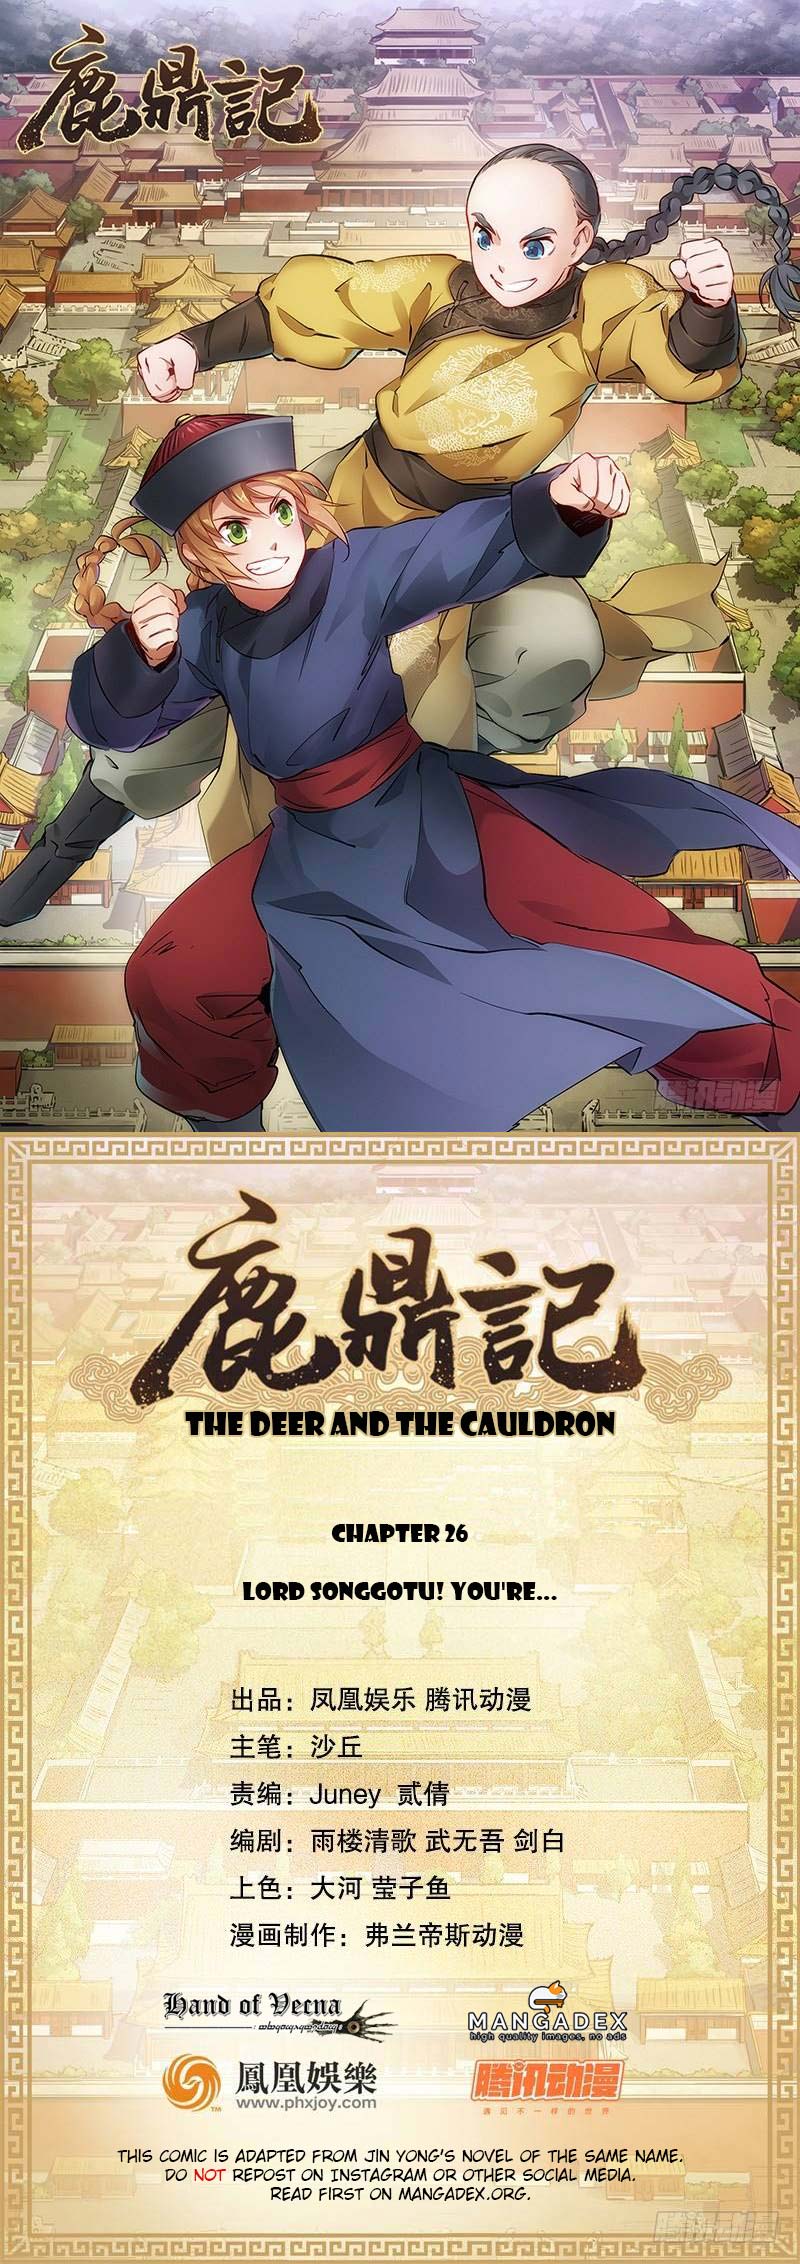 The Deer And The Cauldron Chapter 26: Lord Songgotu! You're... - Picture 1